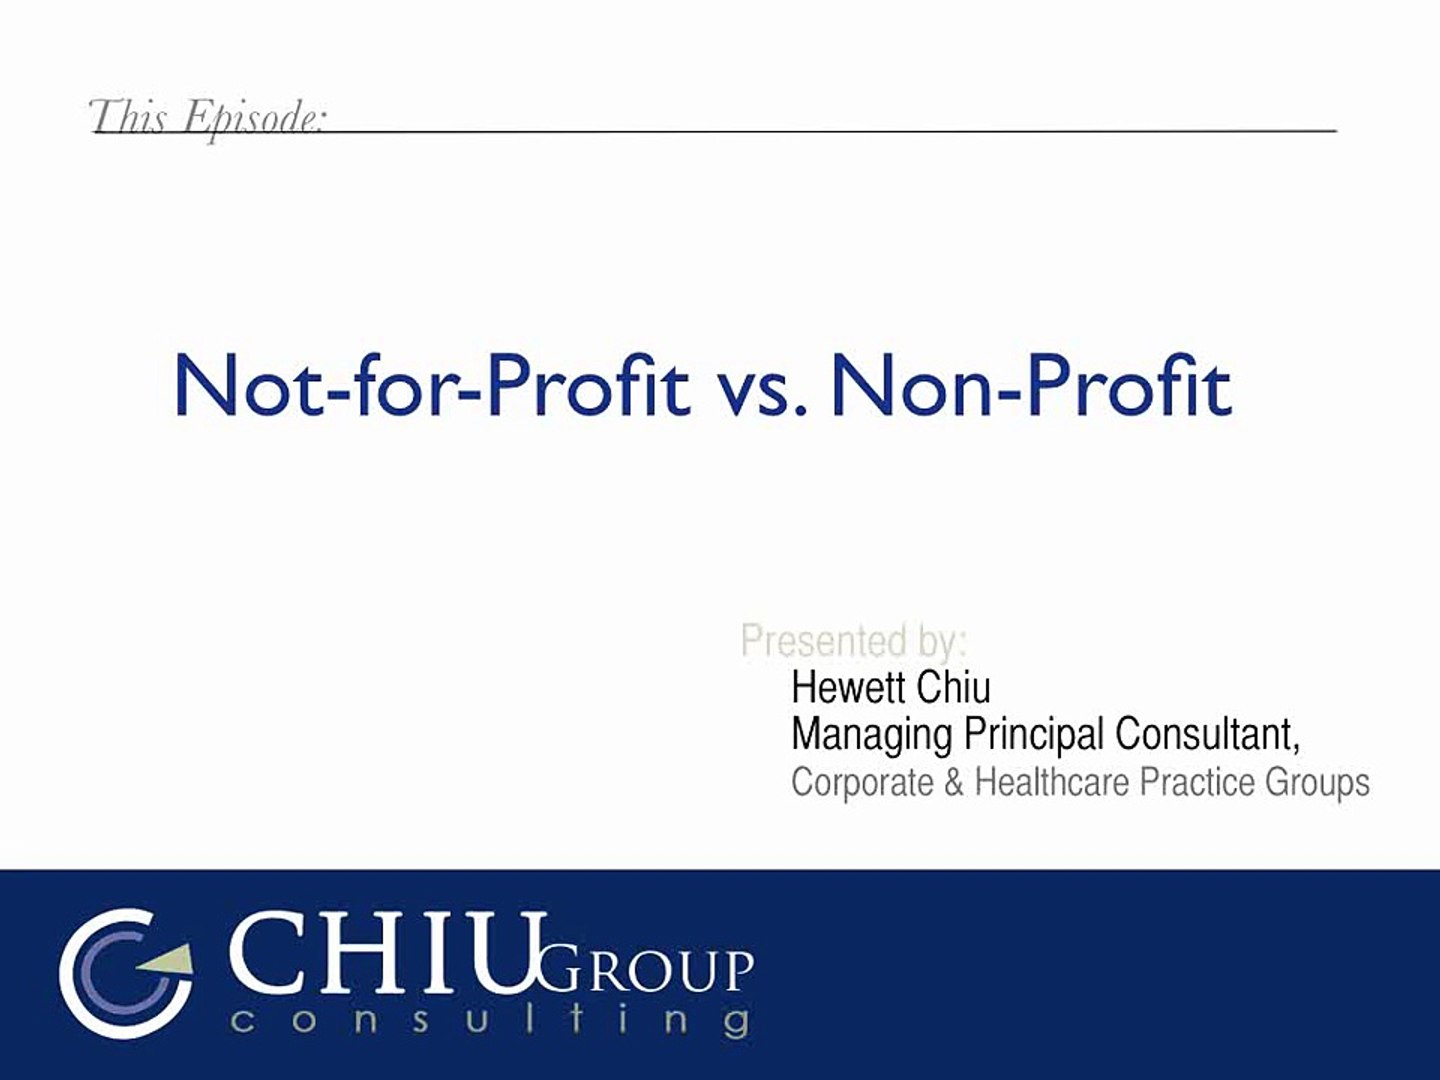 Non-Profit vs. Not-for-Profit - What's the Difference?